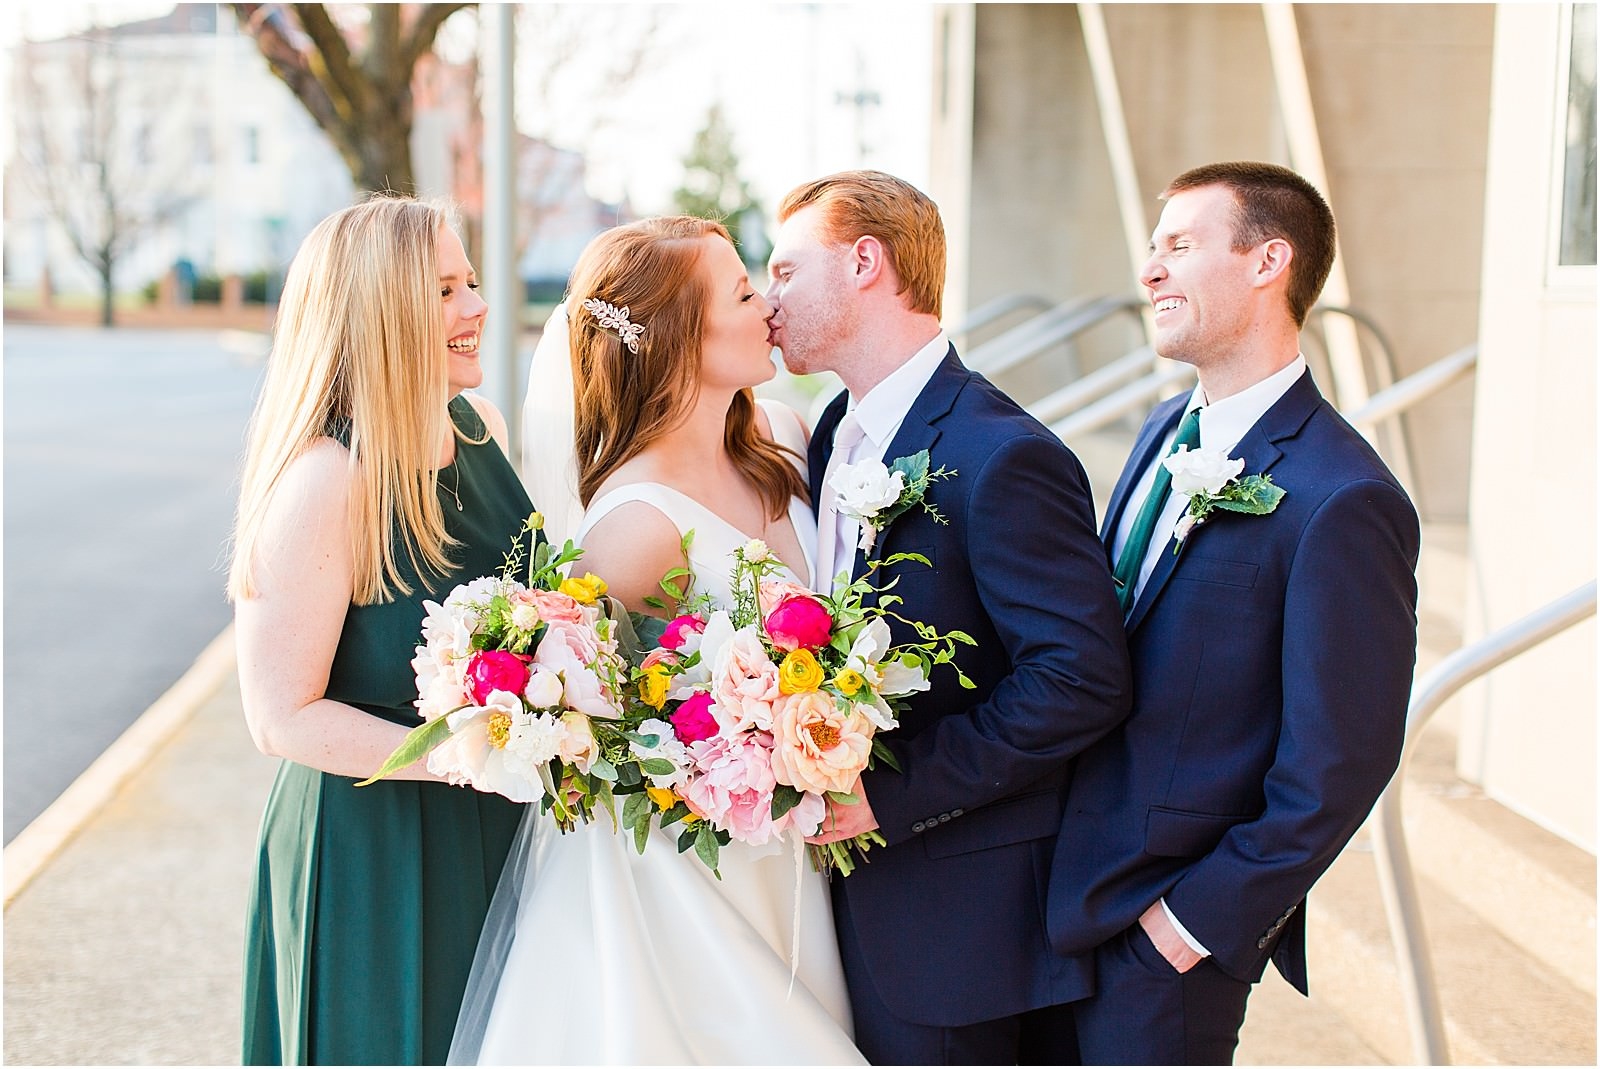 A Perfectly Intimate Wedding in Downtown Evansville Indiana | Jennah and Steve | Bret and Brandie Photography | | 0081.jpg